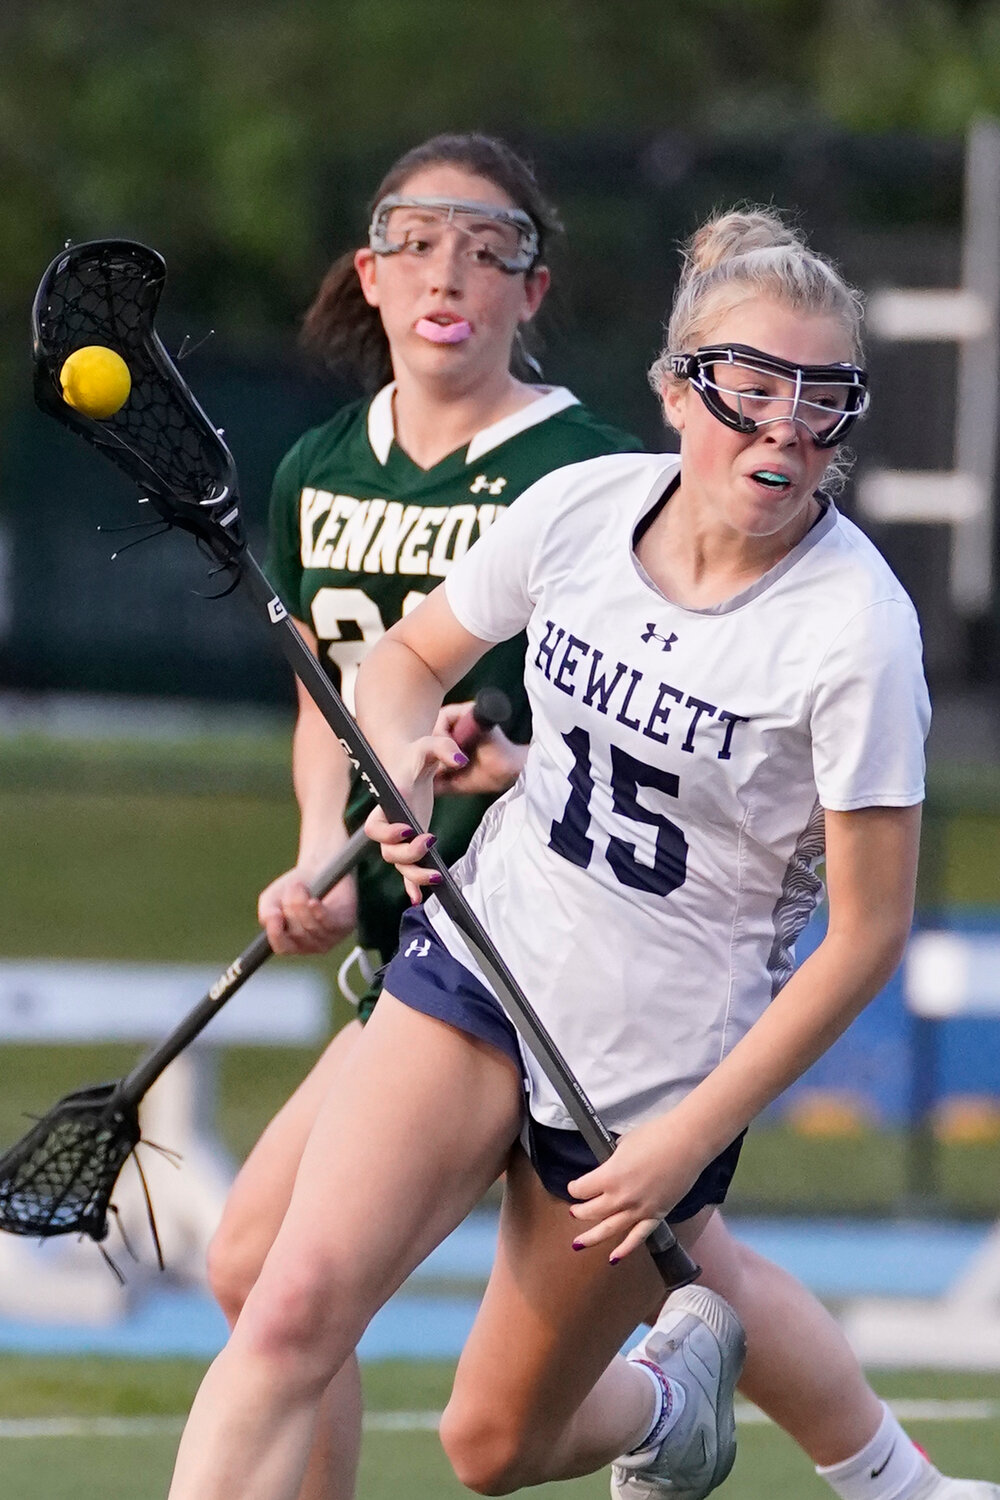 Marcie Iannico scored four times in Hewlett's 16-5 victory over Kennedy.